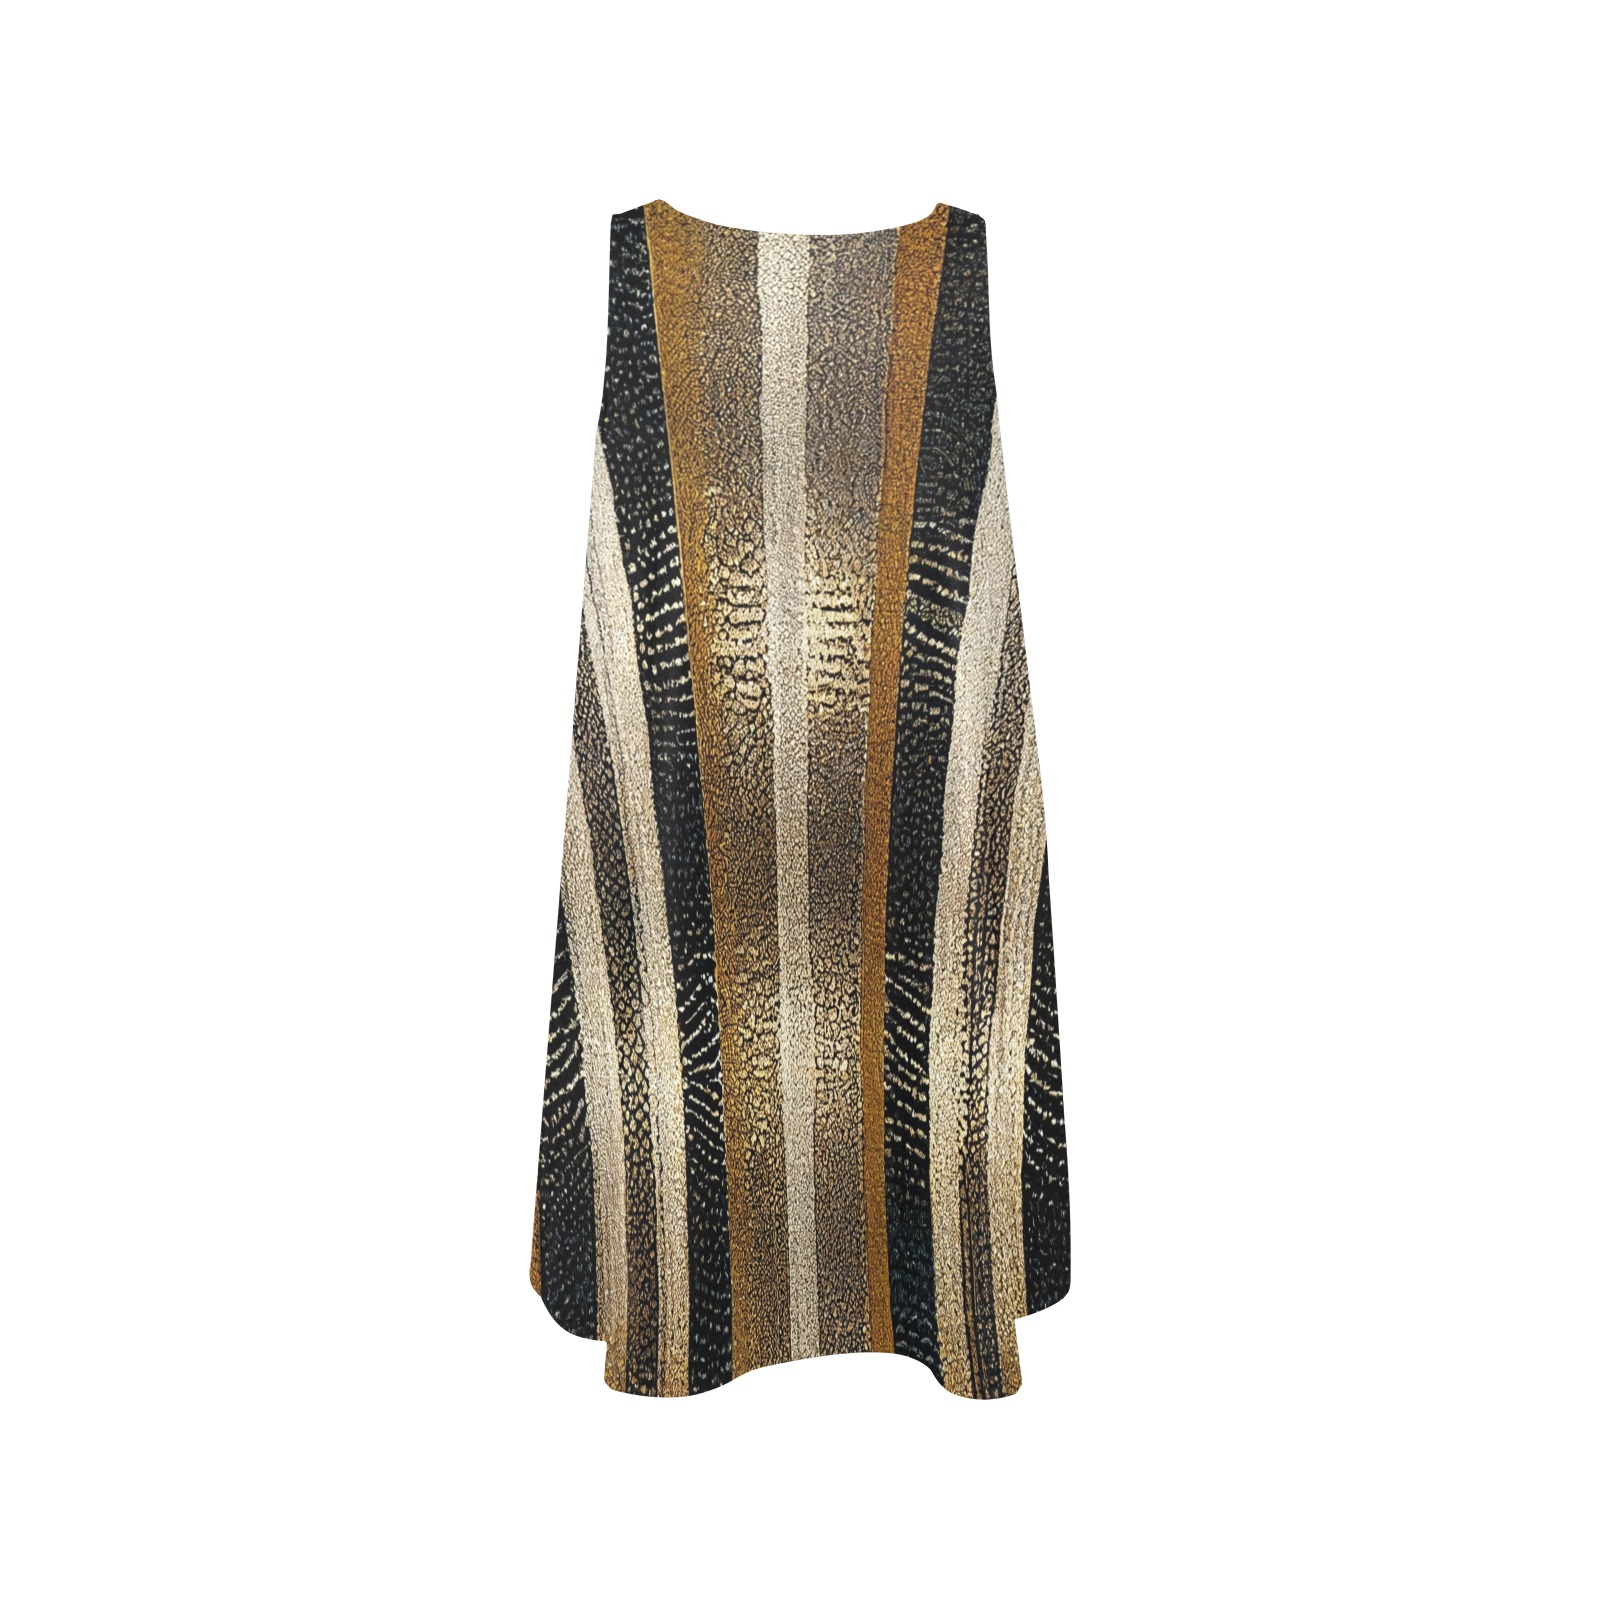 vertical striped pattern, gold, brown and silver Sleeveless A-Line Pocket Dress (Model D57)